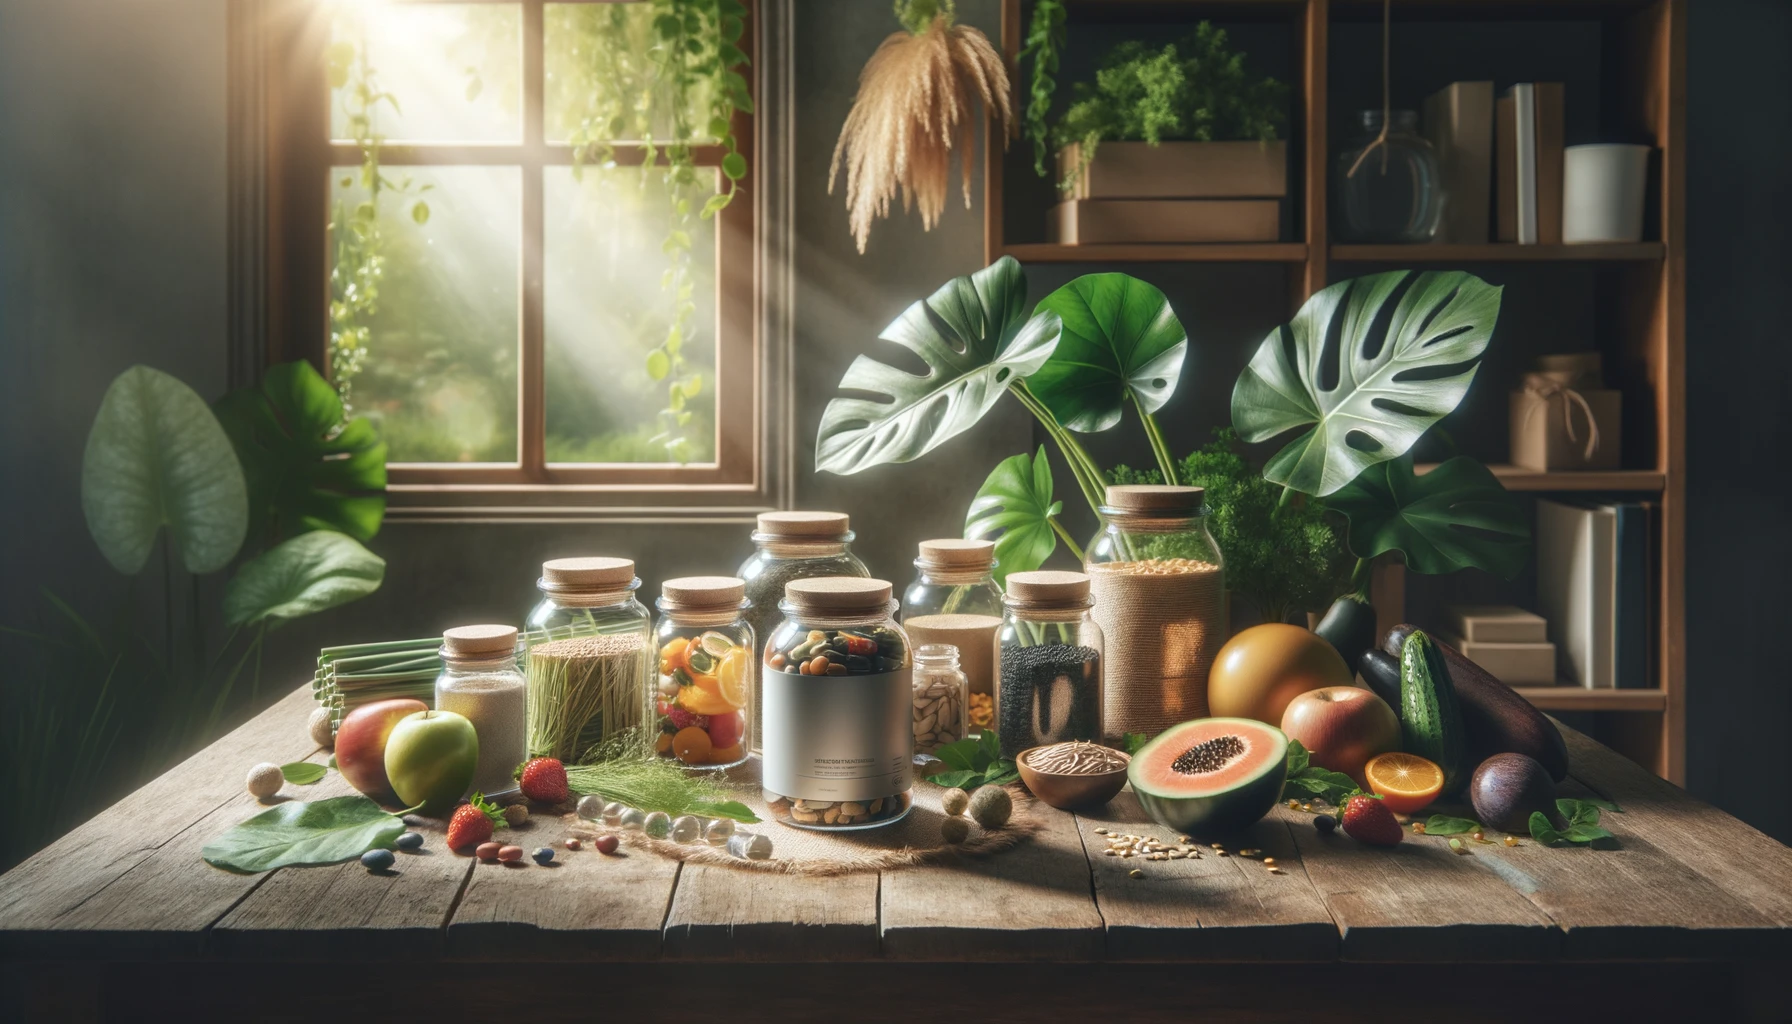 A collection of organic supplements in glass jars placed amidst their whole food sources on a wooden table, bathed in natural sunlight to depict wellness and natural health.